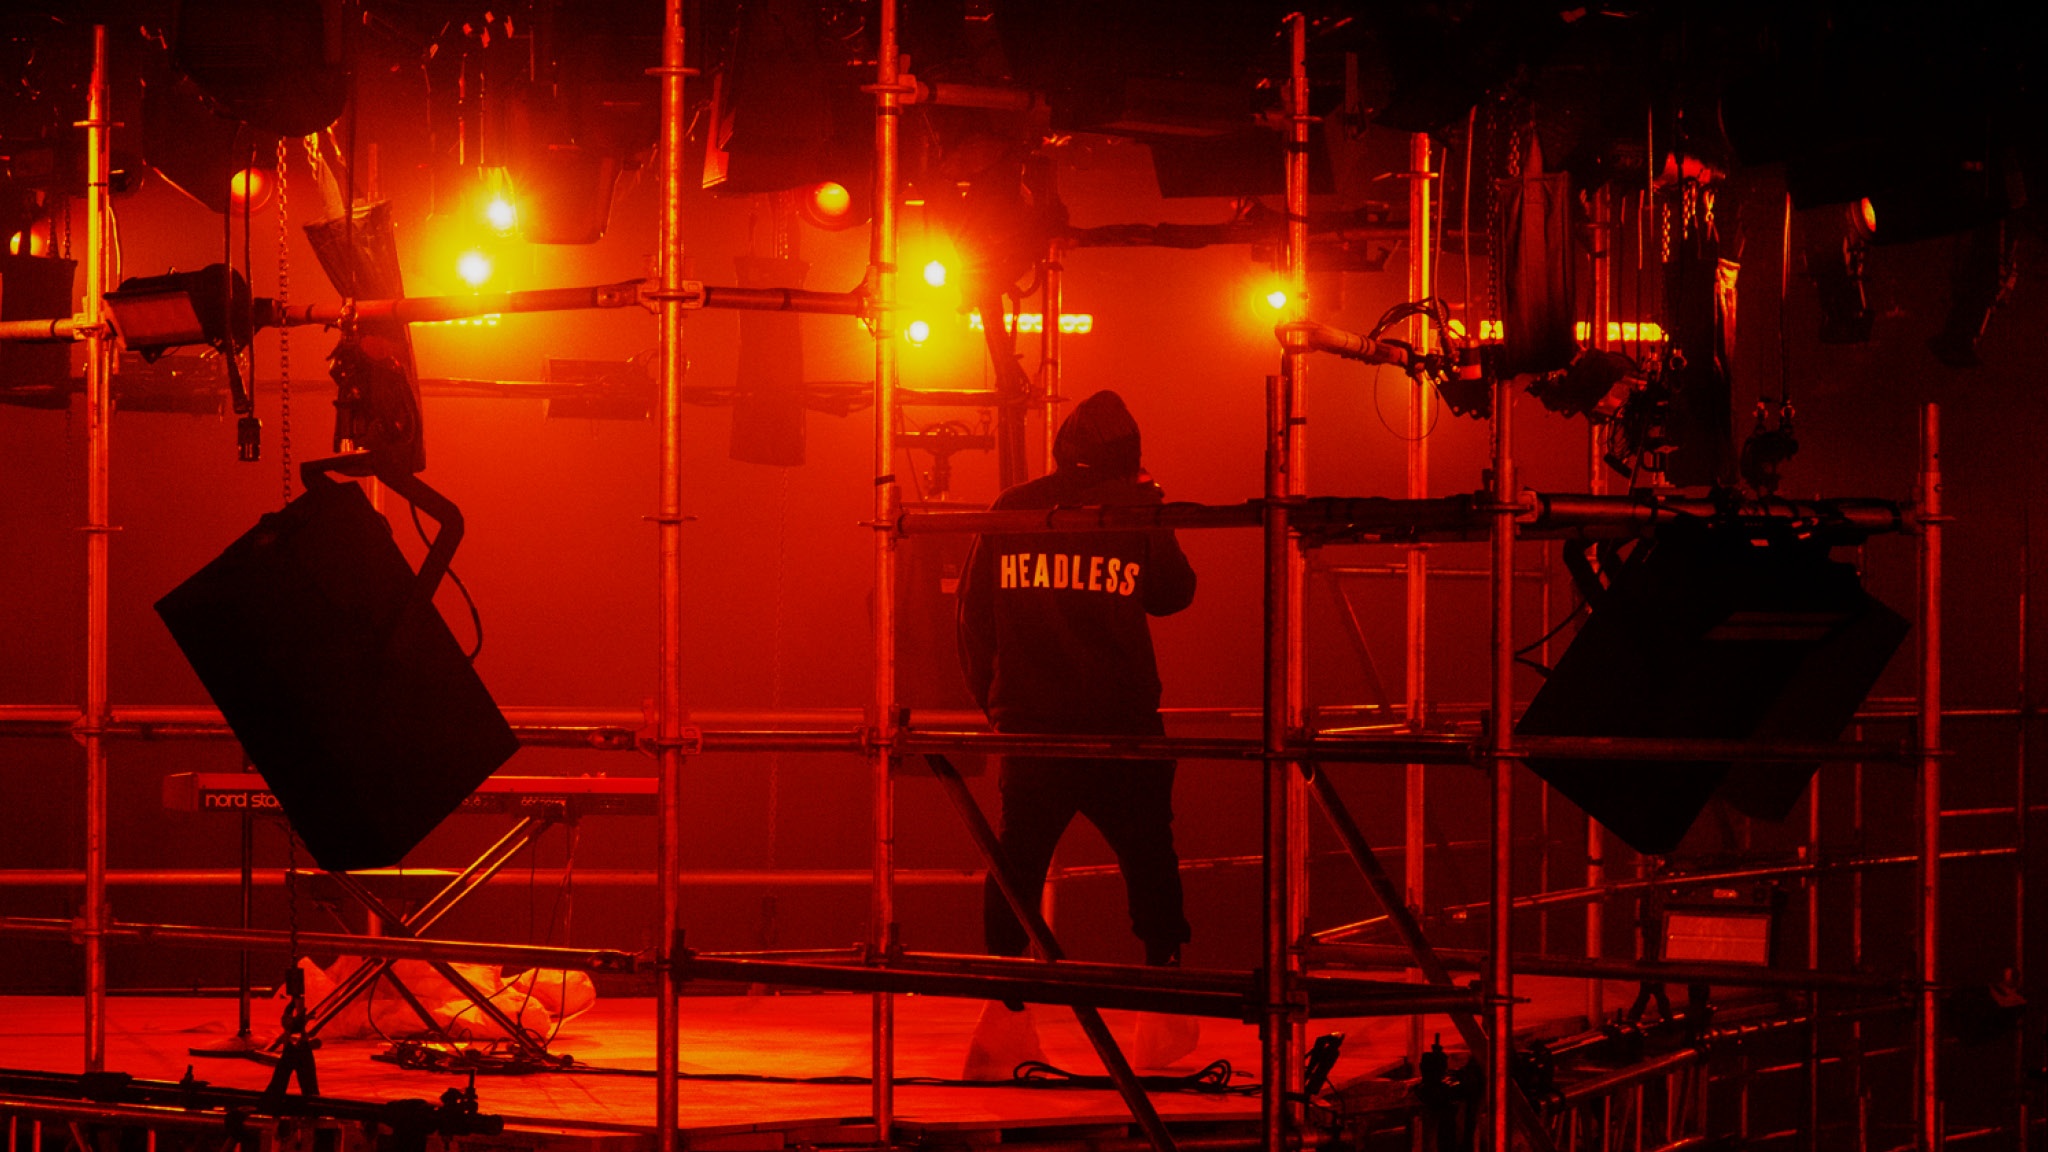 A performer wearing a hoodie and seen from behind stands on scaffolding in a theater lit by red spotlights